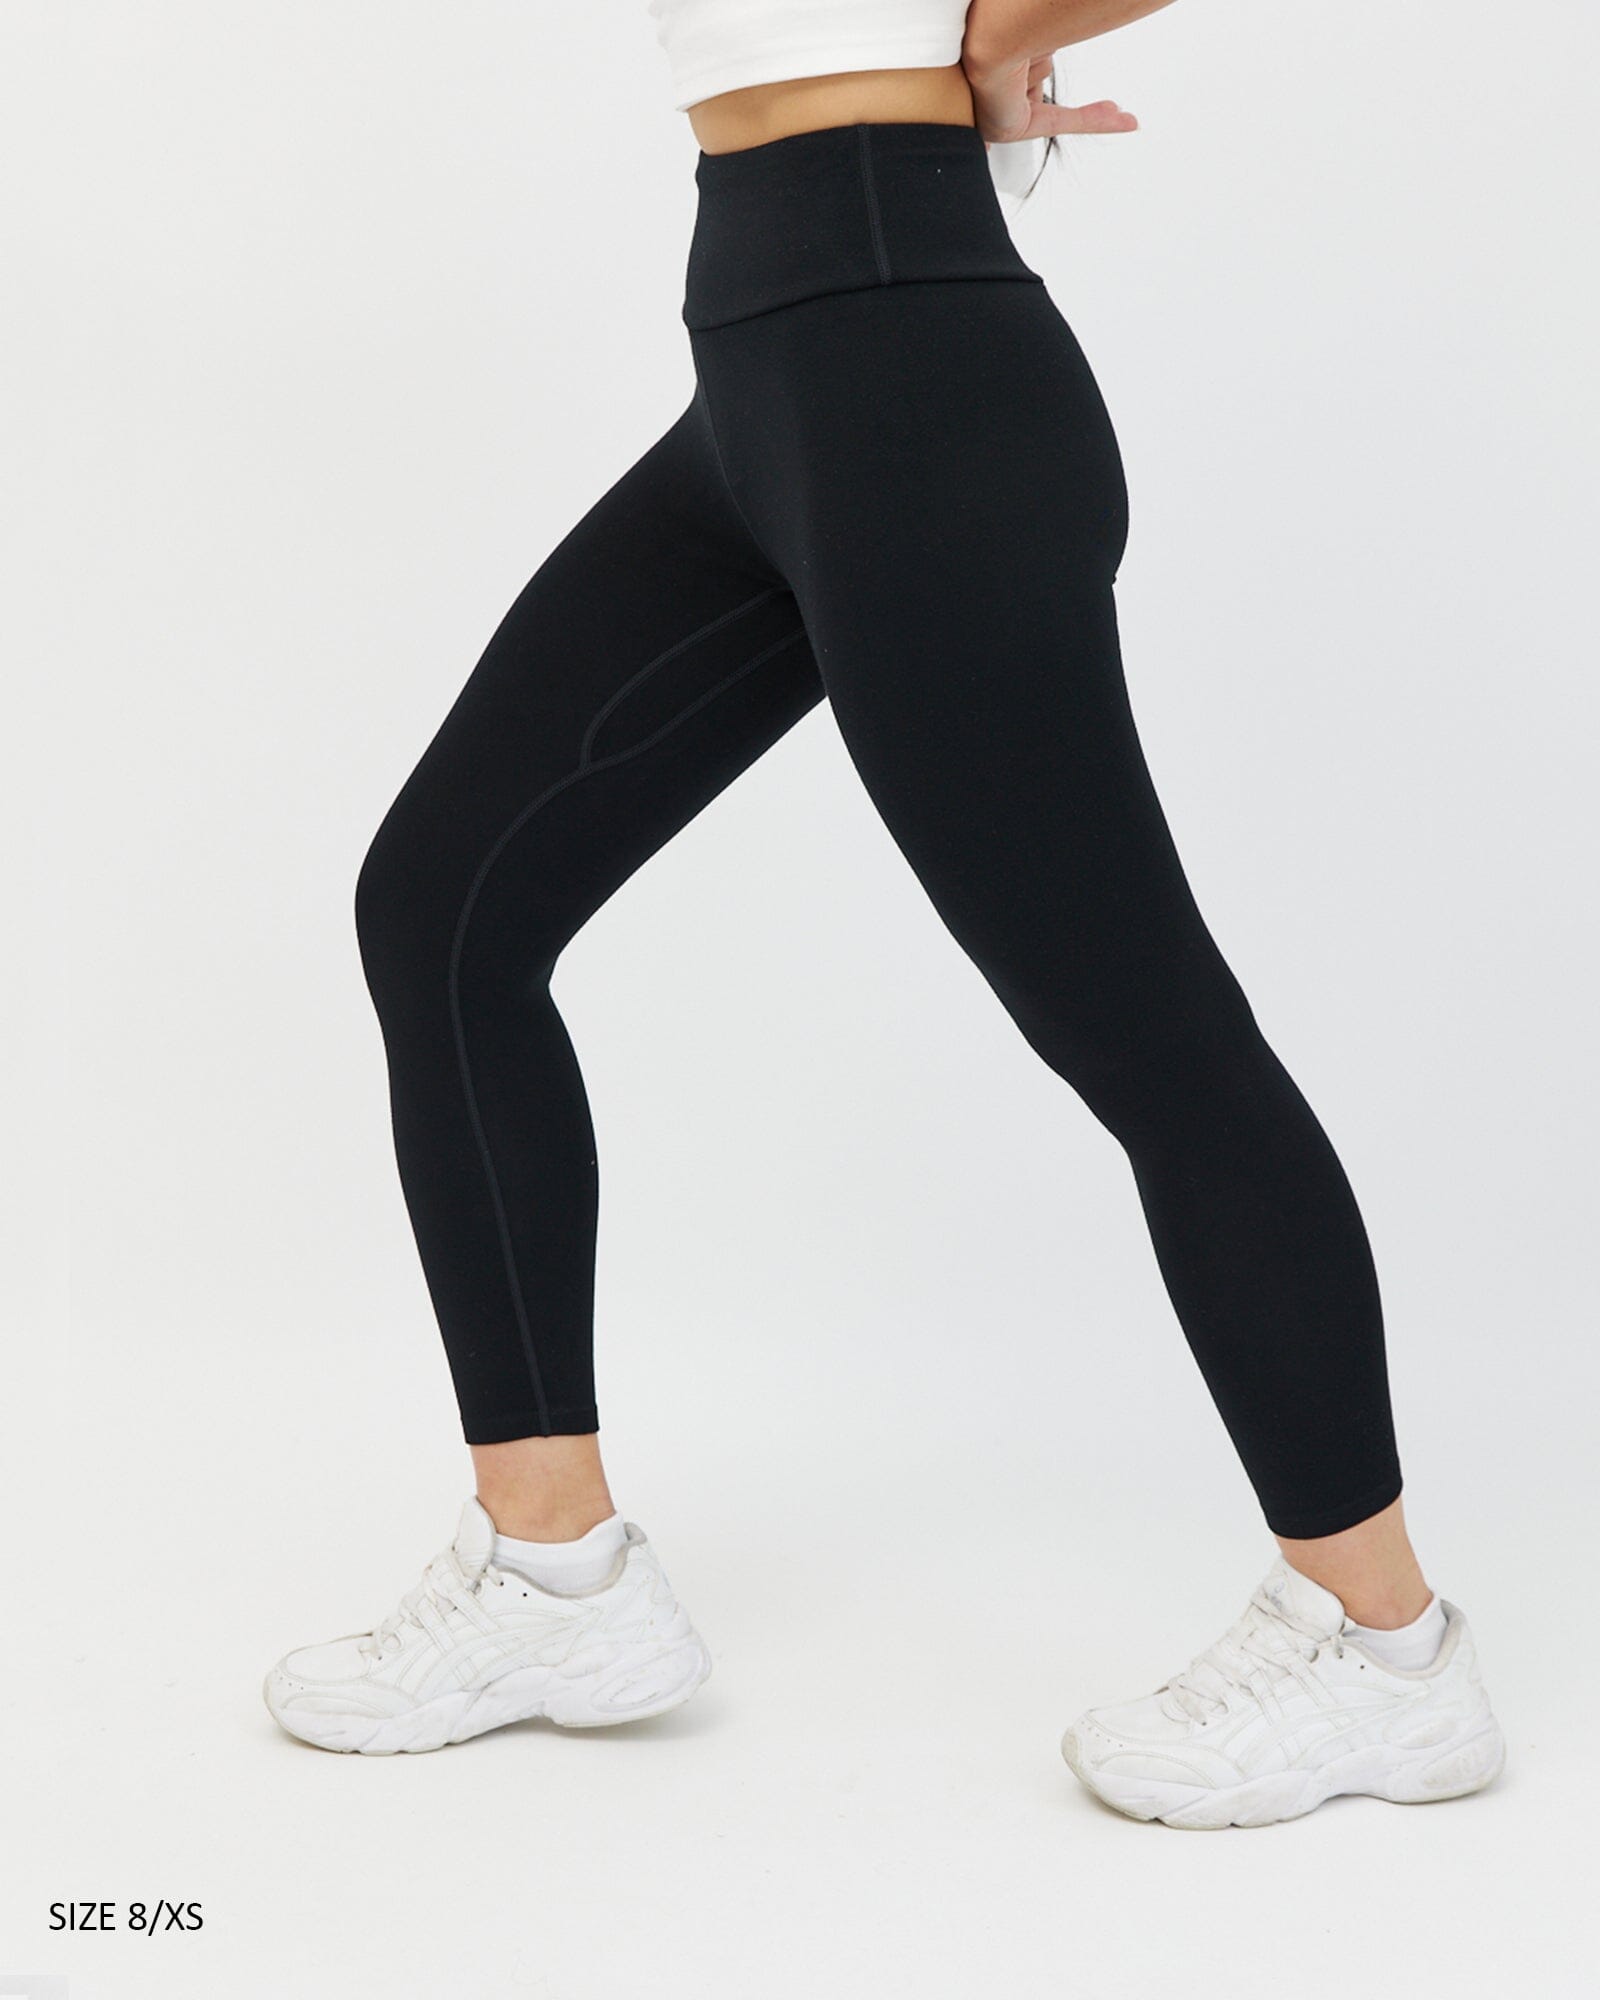 The ultimate comfy leggings - CROPPED Leggings Avila the label XS/8 Stretch 